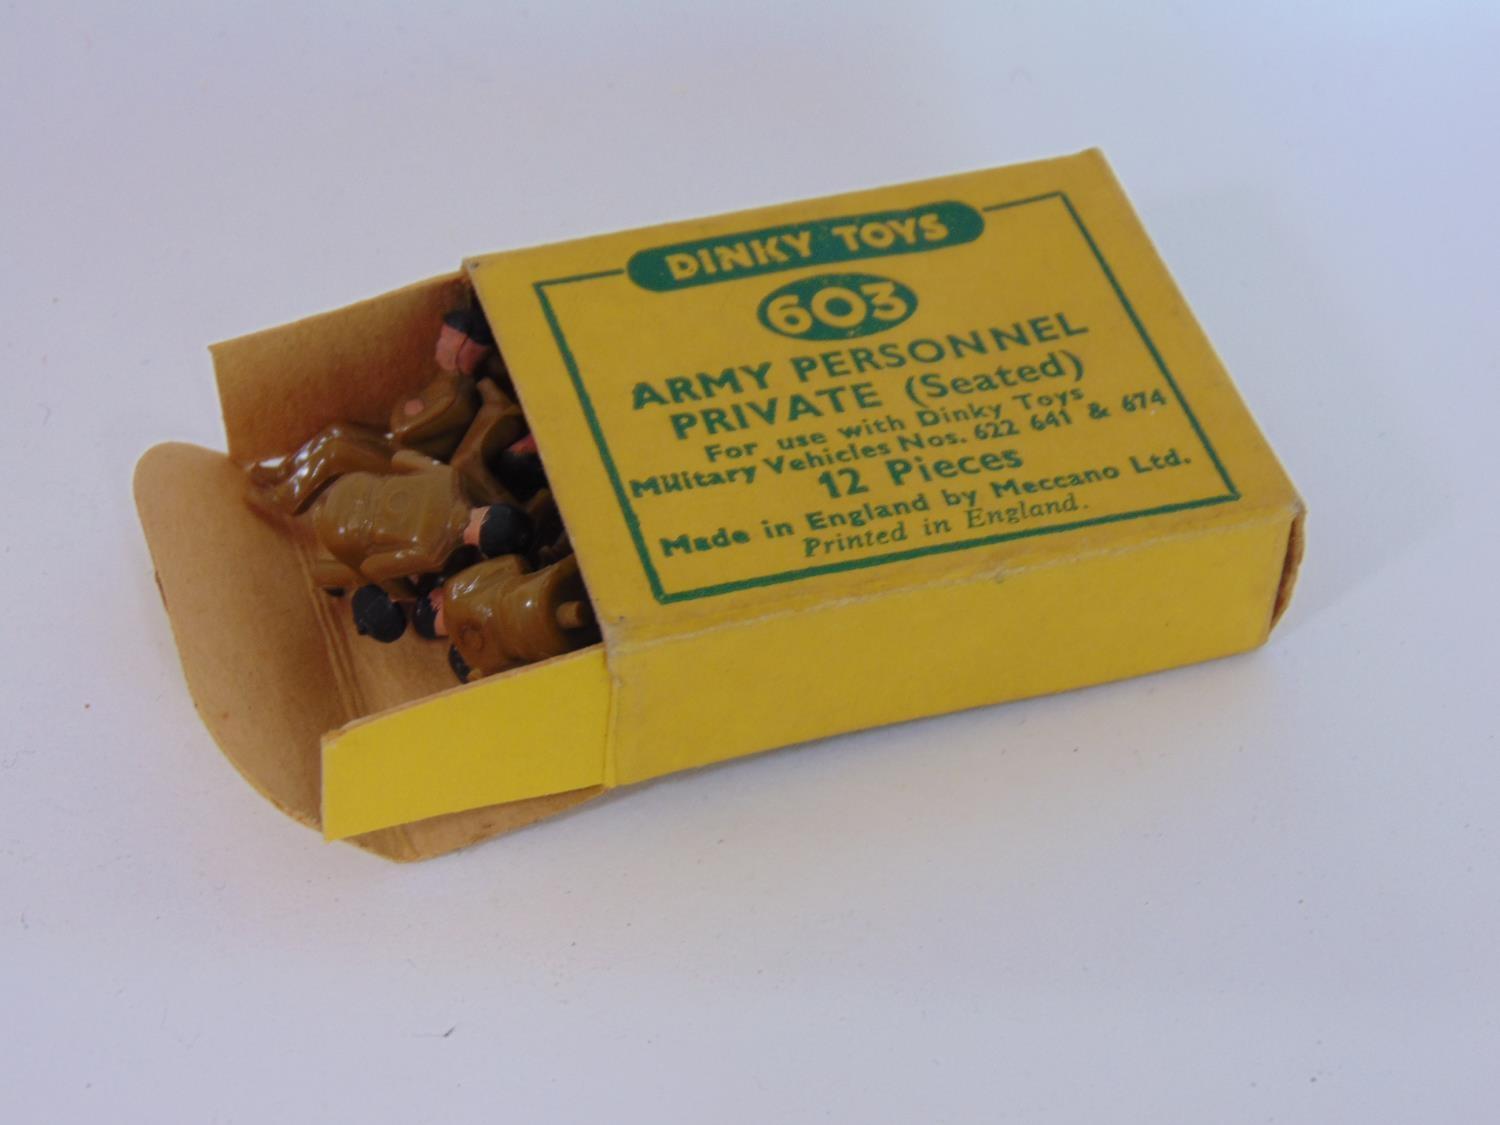 2 complete sets of Dinky Toys 603 Army Personnel (seated) together with other similar unboxed - Image 3 of 4